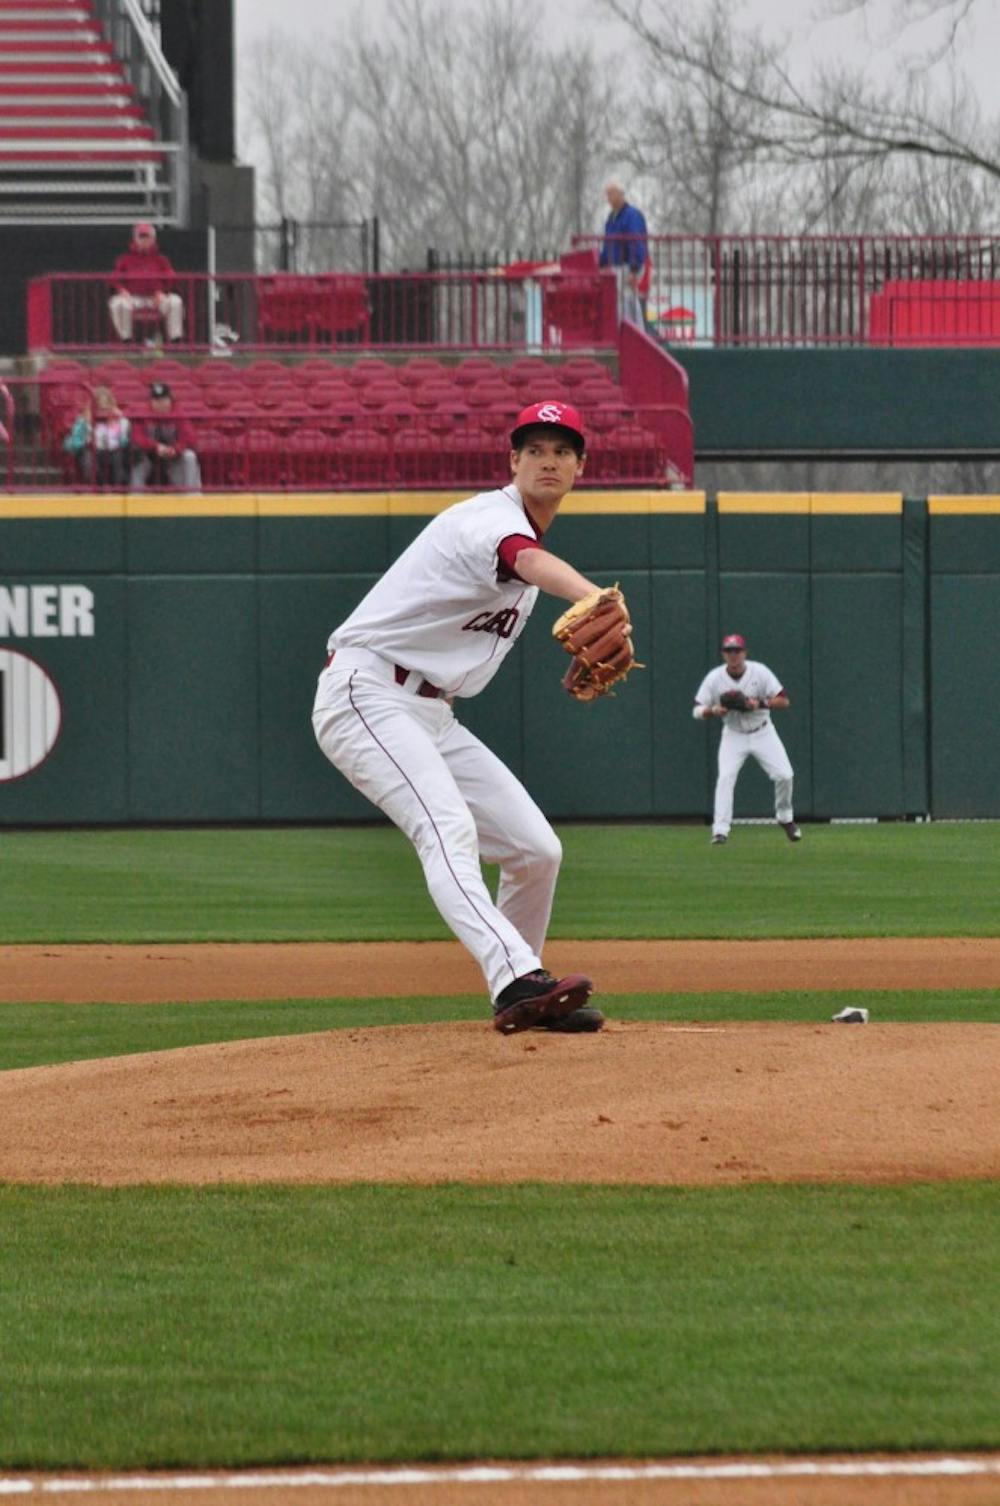 Freshman Jack Wynkoop earned a win in his first start for South Carolina, pitching 5.1 scoreless innings Tuesday.